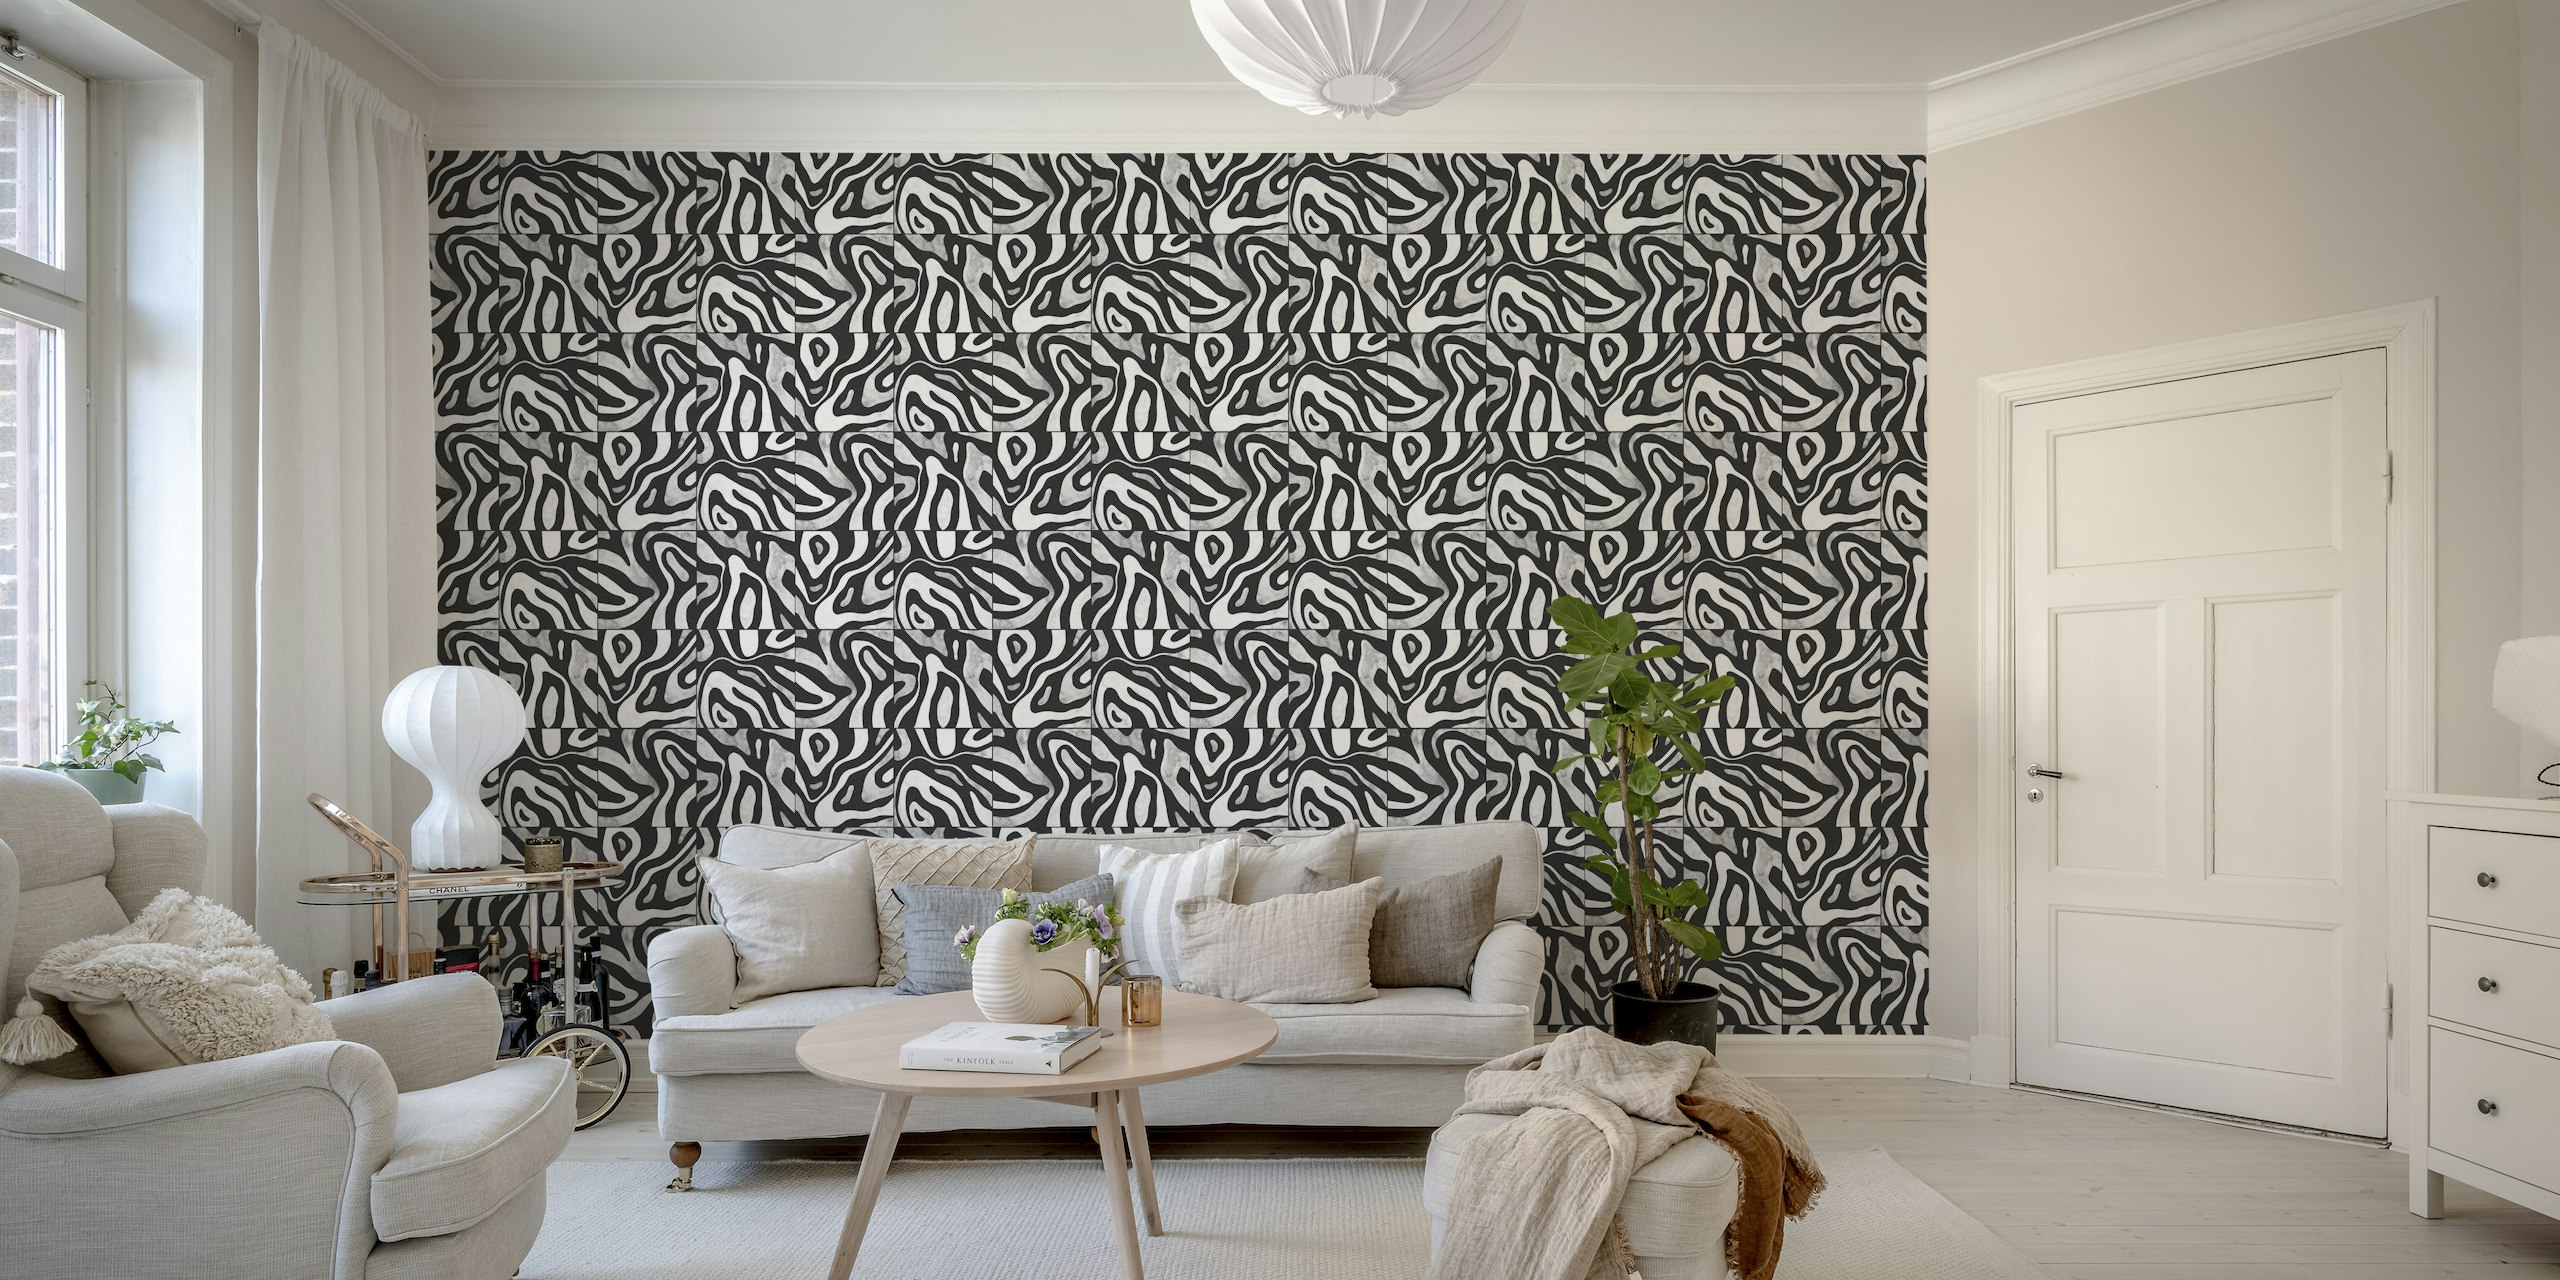 Abstract black and white wall mural with a pattern resembling hills viewed from above